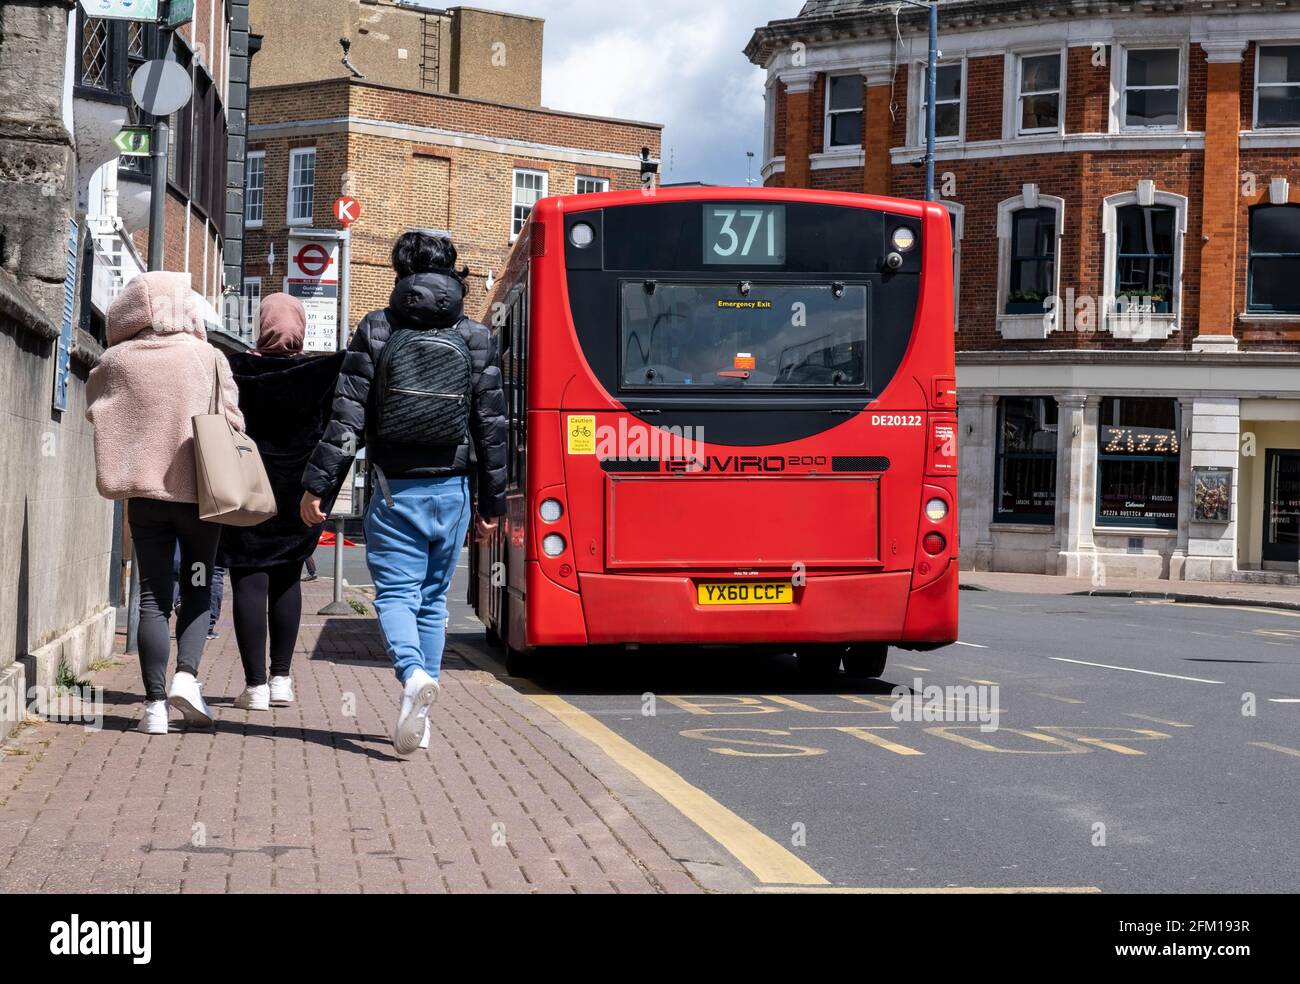 Kingston Upon Thames London UK, May 04 2021, Three Anonymous Woman Walking Along Pavementment Next To A Red Single Decker Bus On A Town Centre High St Stock Photo